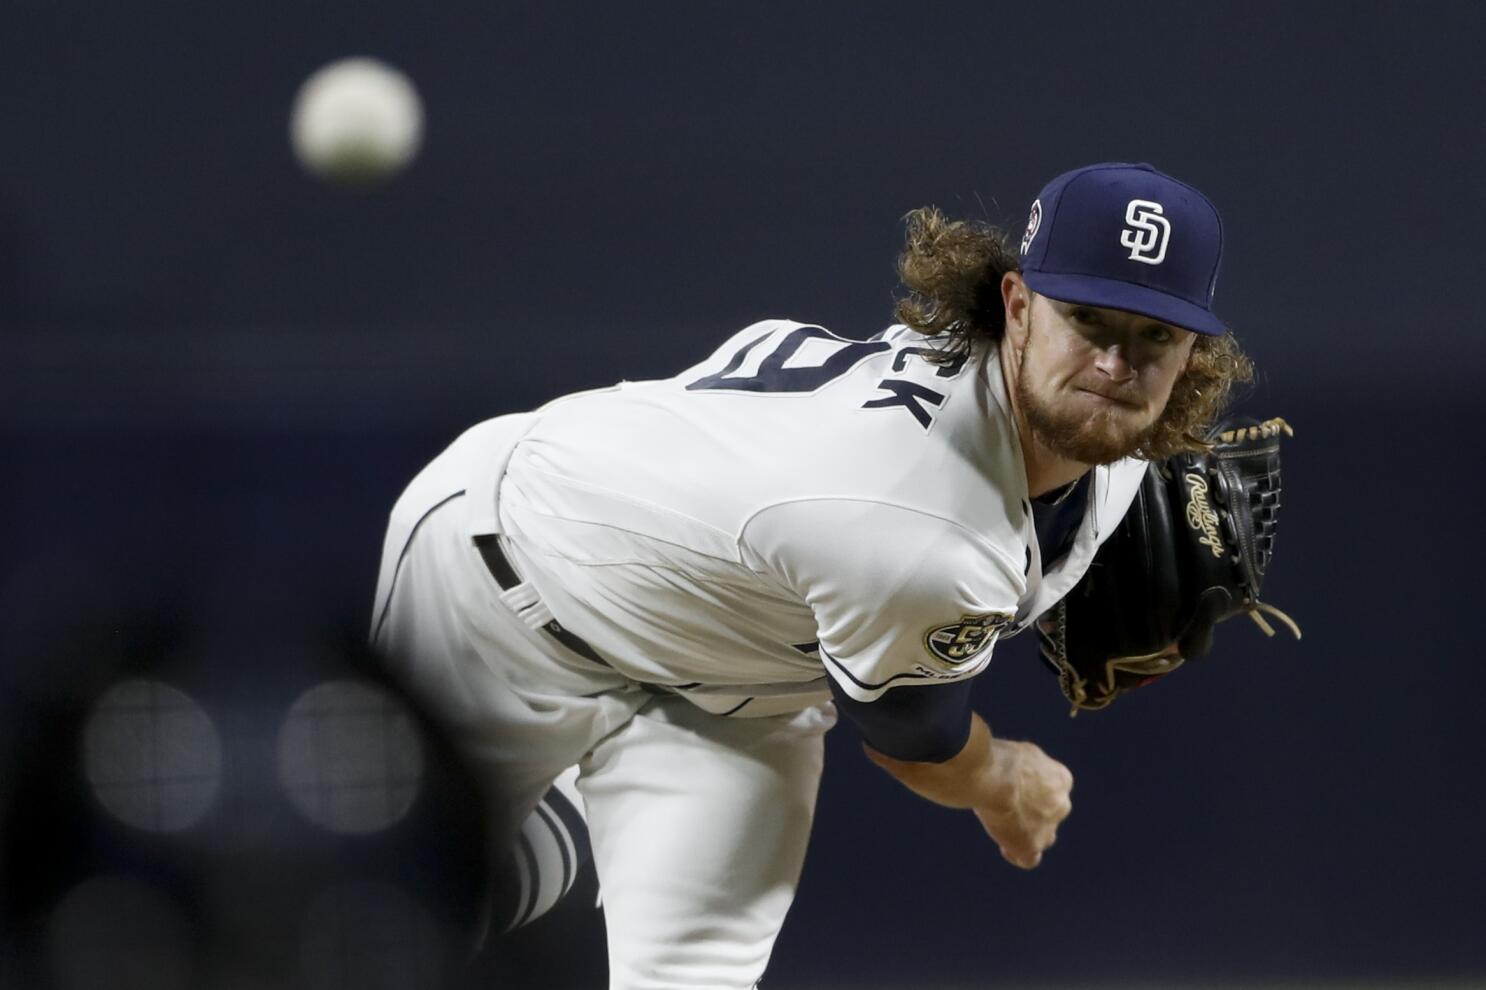 Padres roster review: Chris Paddack - The San Diego Union-Tribune